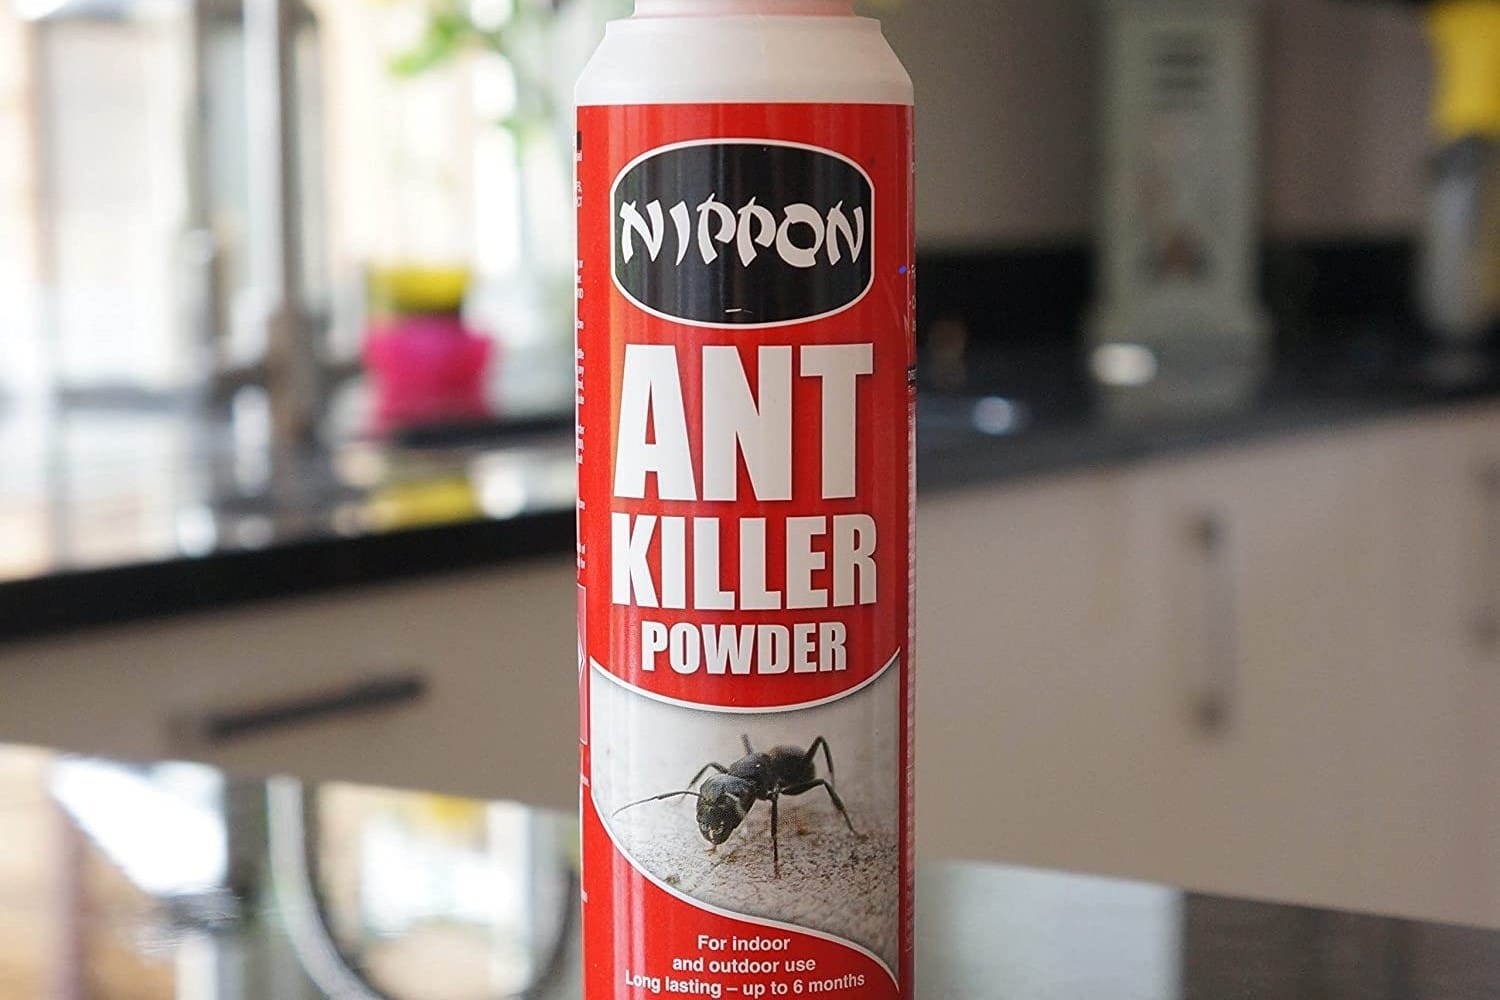 How does ant killer work